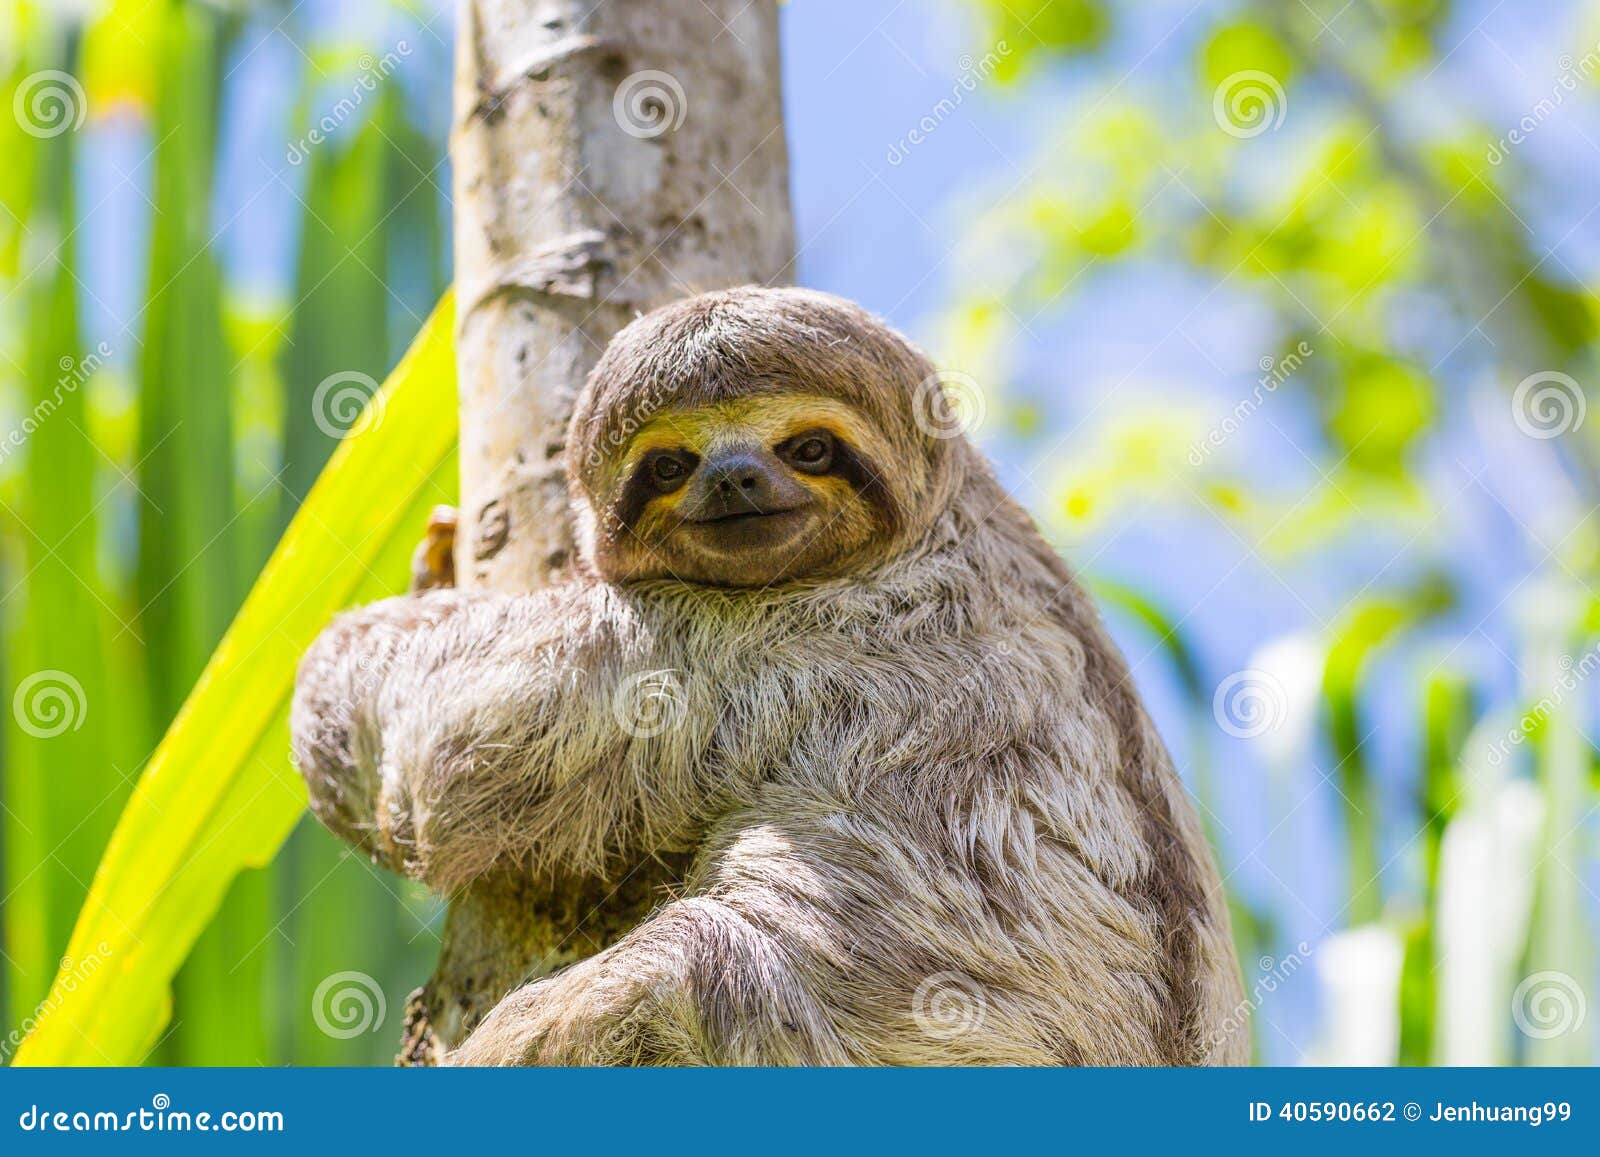 young 3 toed sloth in its natural habitat. amazon river, peru